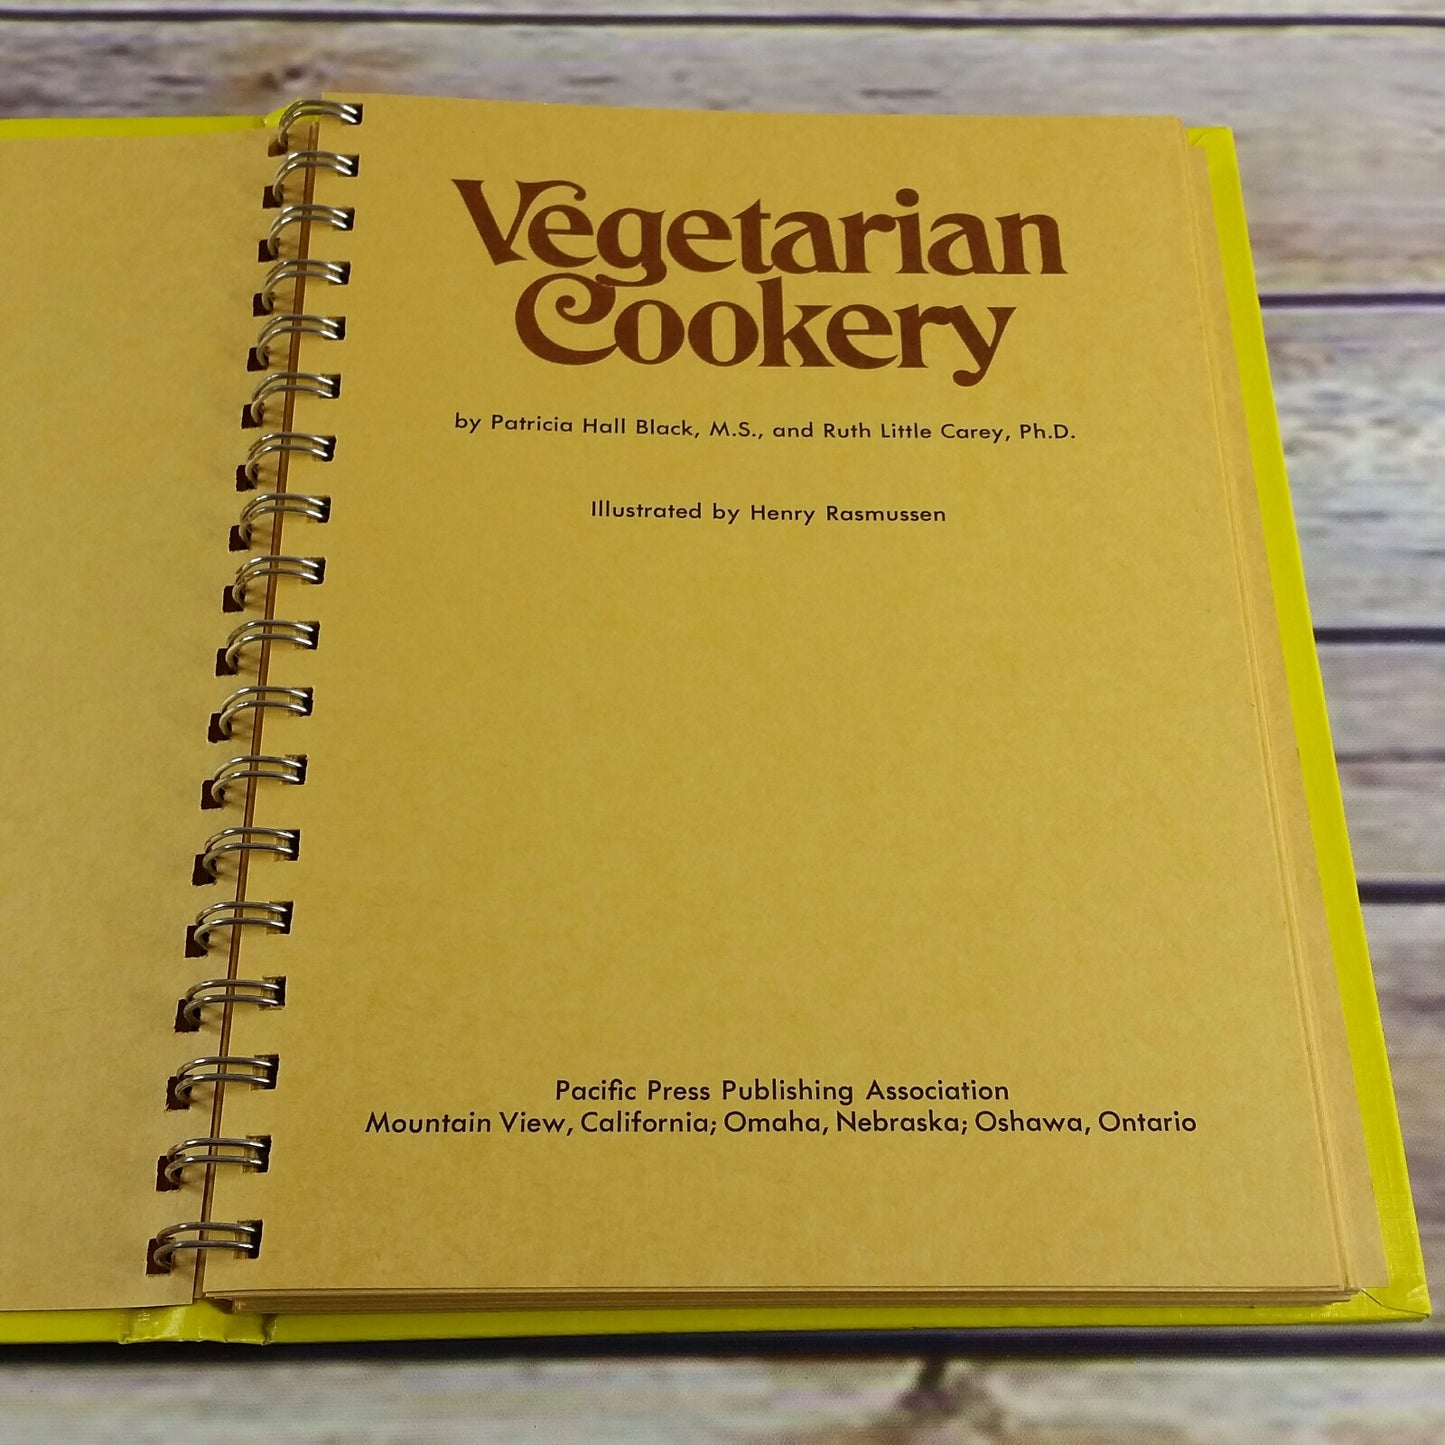 Vintage Cookbook Vegetarian Cookery 4 1971 Pies Cakes Cookies Desserts Recipes Spiral Bound Hardcover - At Grandma's Table